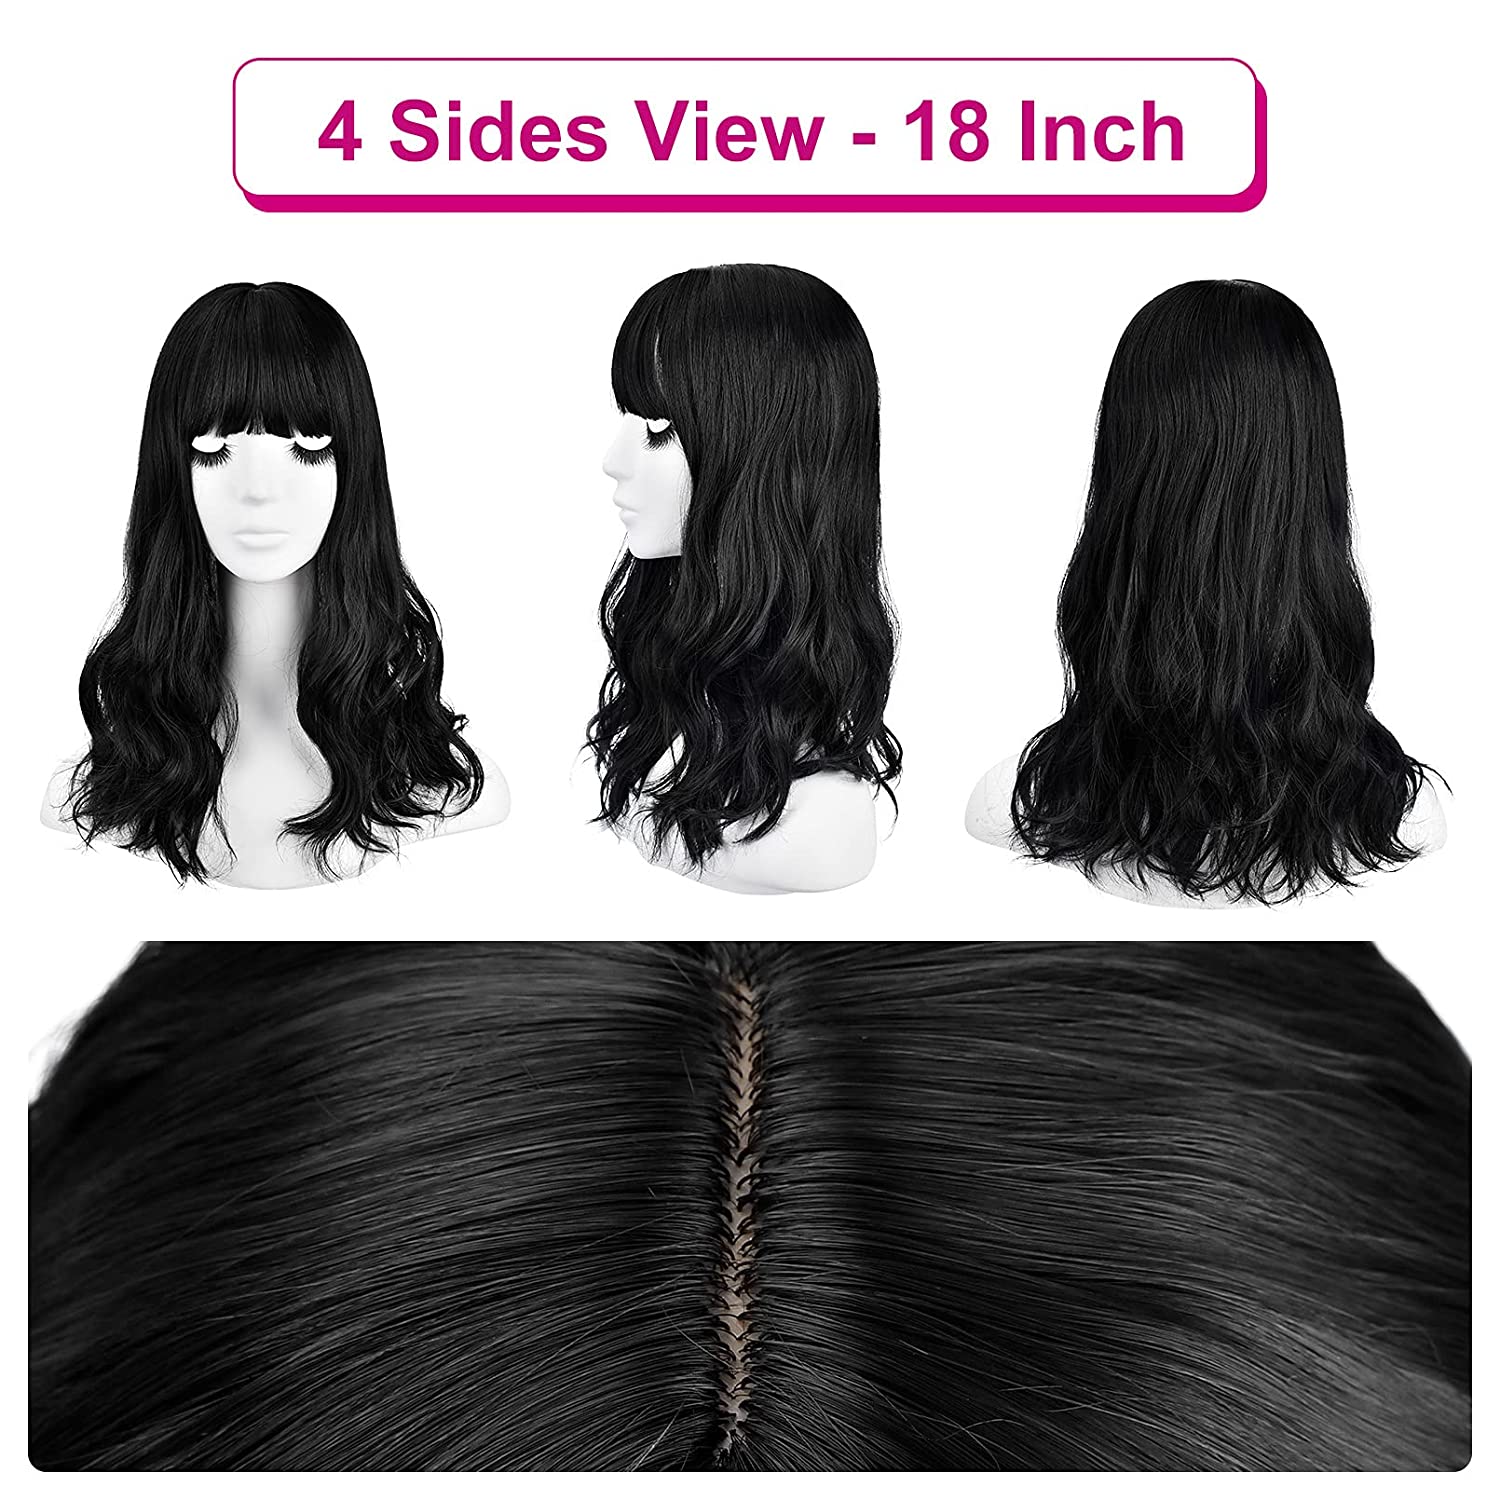 REECHO Hair Topper, Wiglets Hairpieces for Women with Thinning Hair 3 Clips in Wavy Hair Extensions Enhancer with bangs